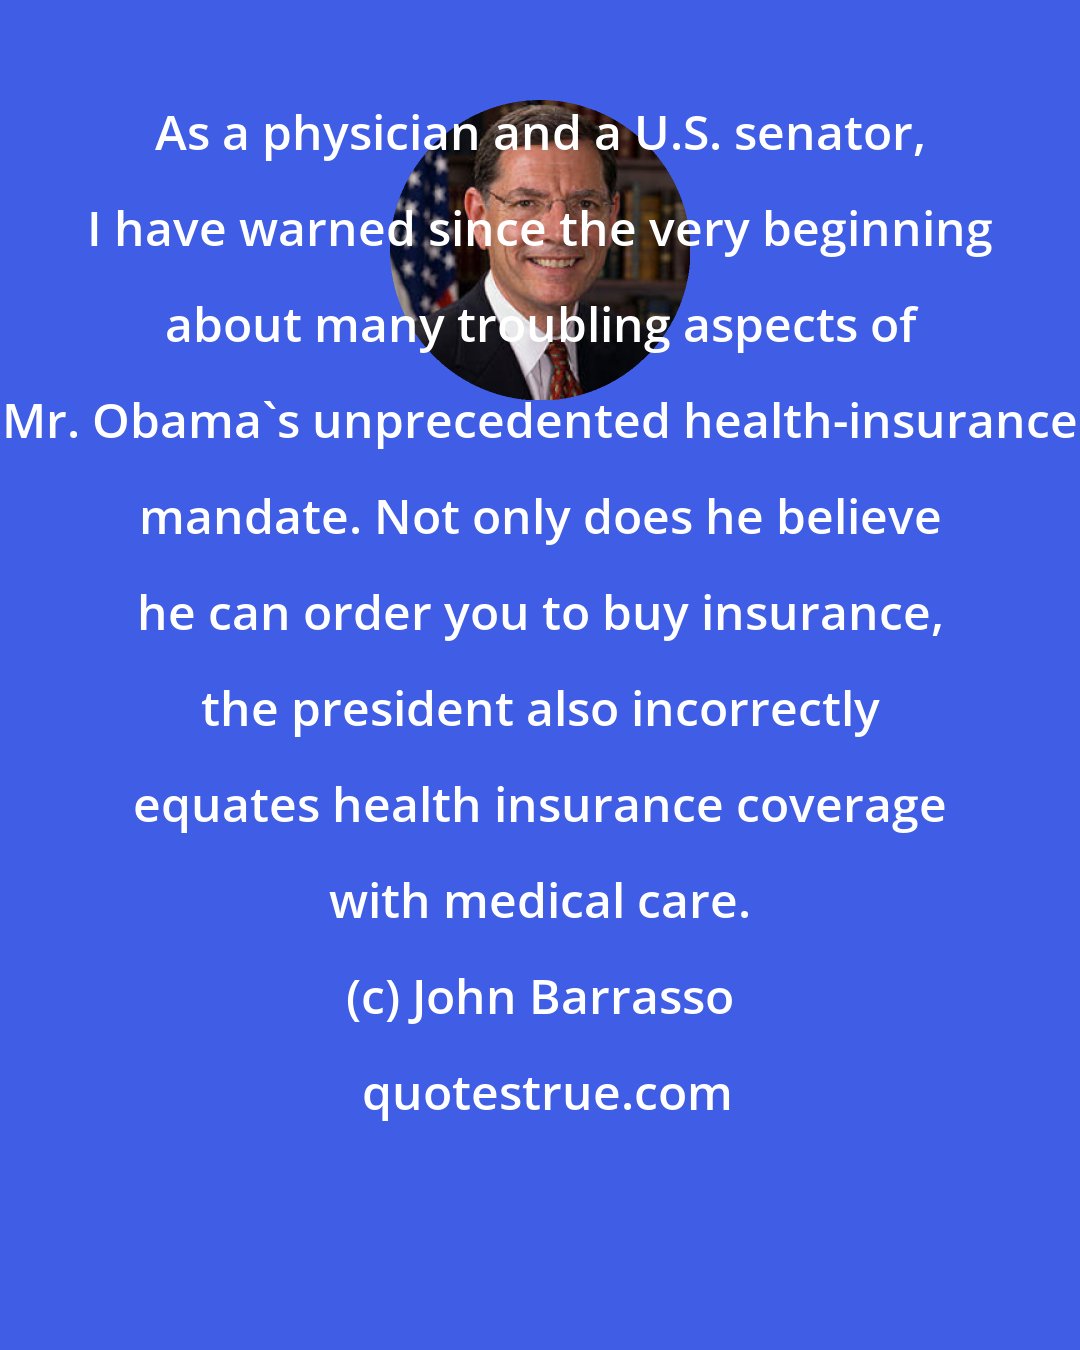 John Barrasso: As a physician and a U.S. senator, I have warned since the very beginning about many troubling aspects of Mr. Obama's unprecedented health-insurance mandate. Not only does he believe he can order you to buy insurance, the president also incorrectly equates health insurance coverage with medical care.